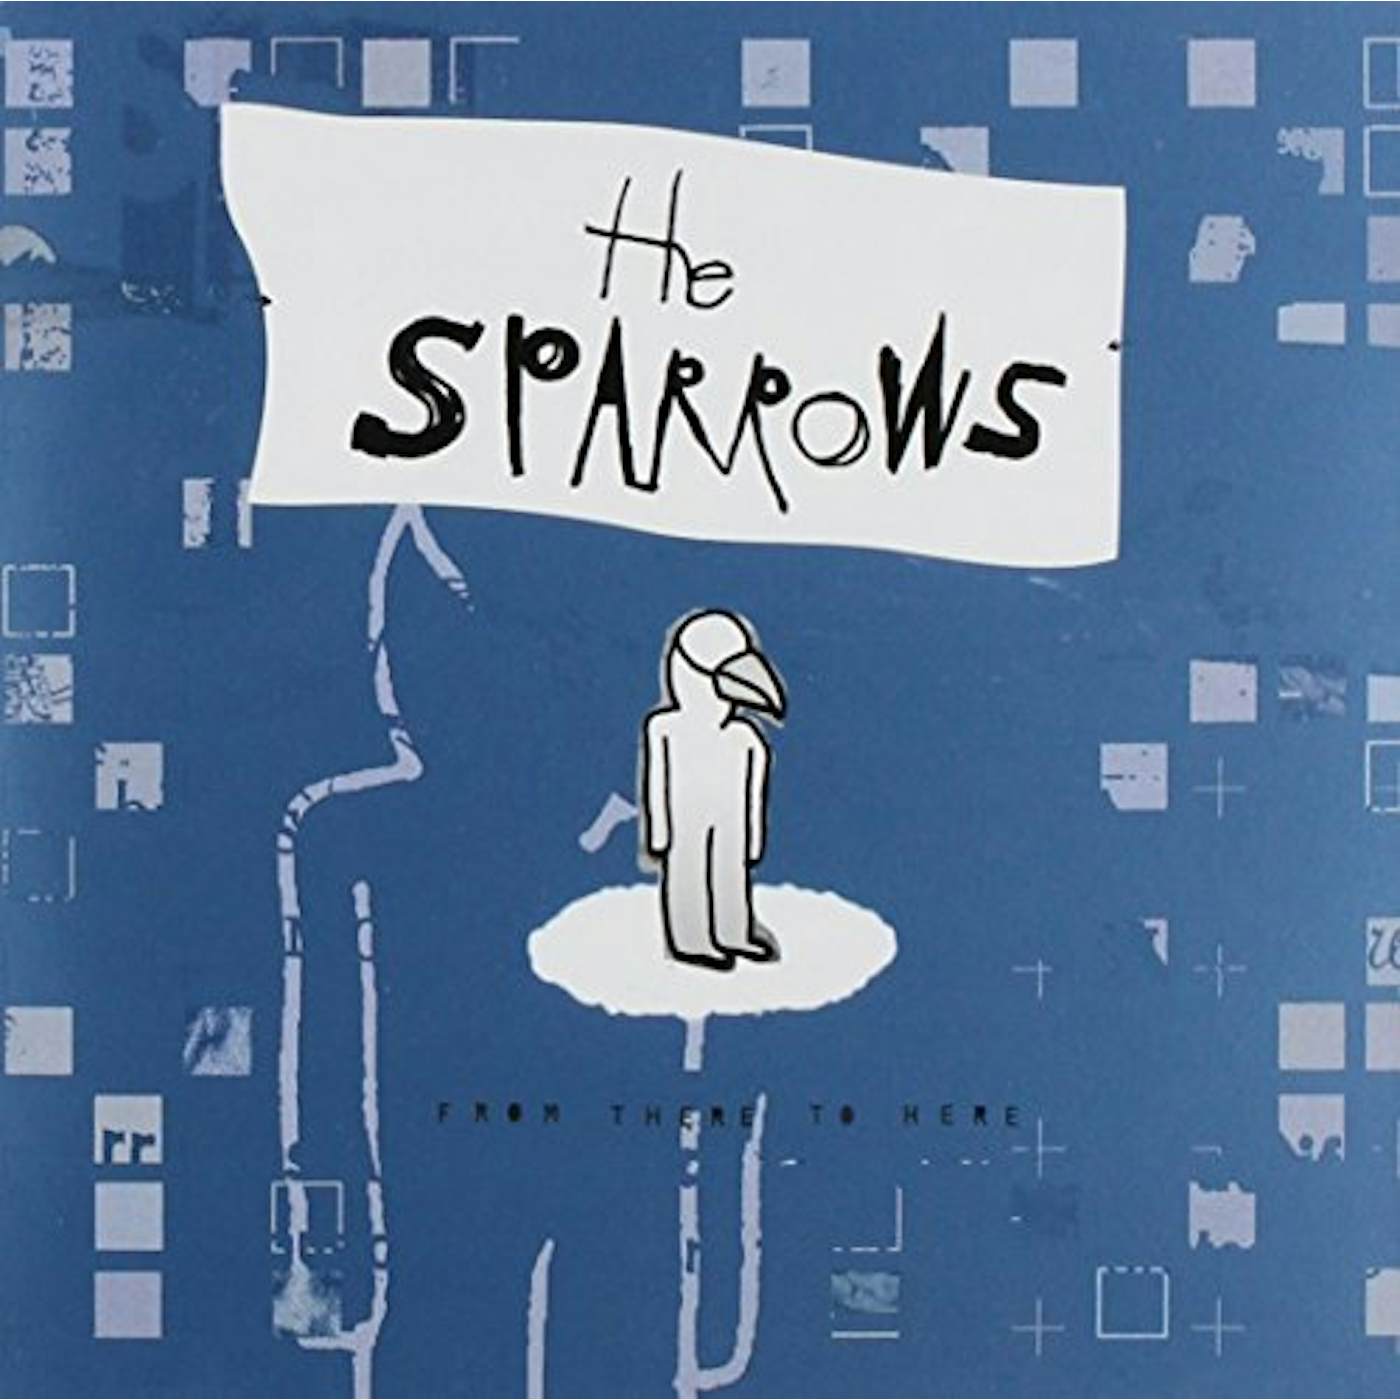 Sparrows FROM THERE TO HERE CD